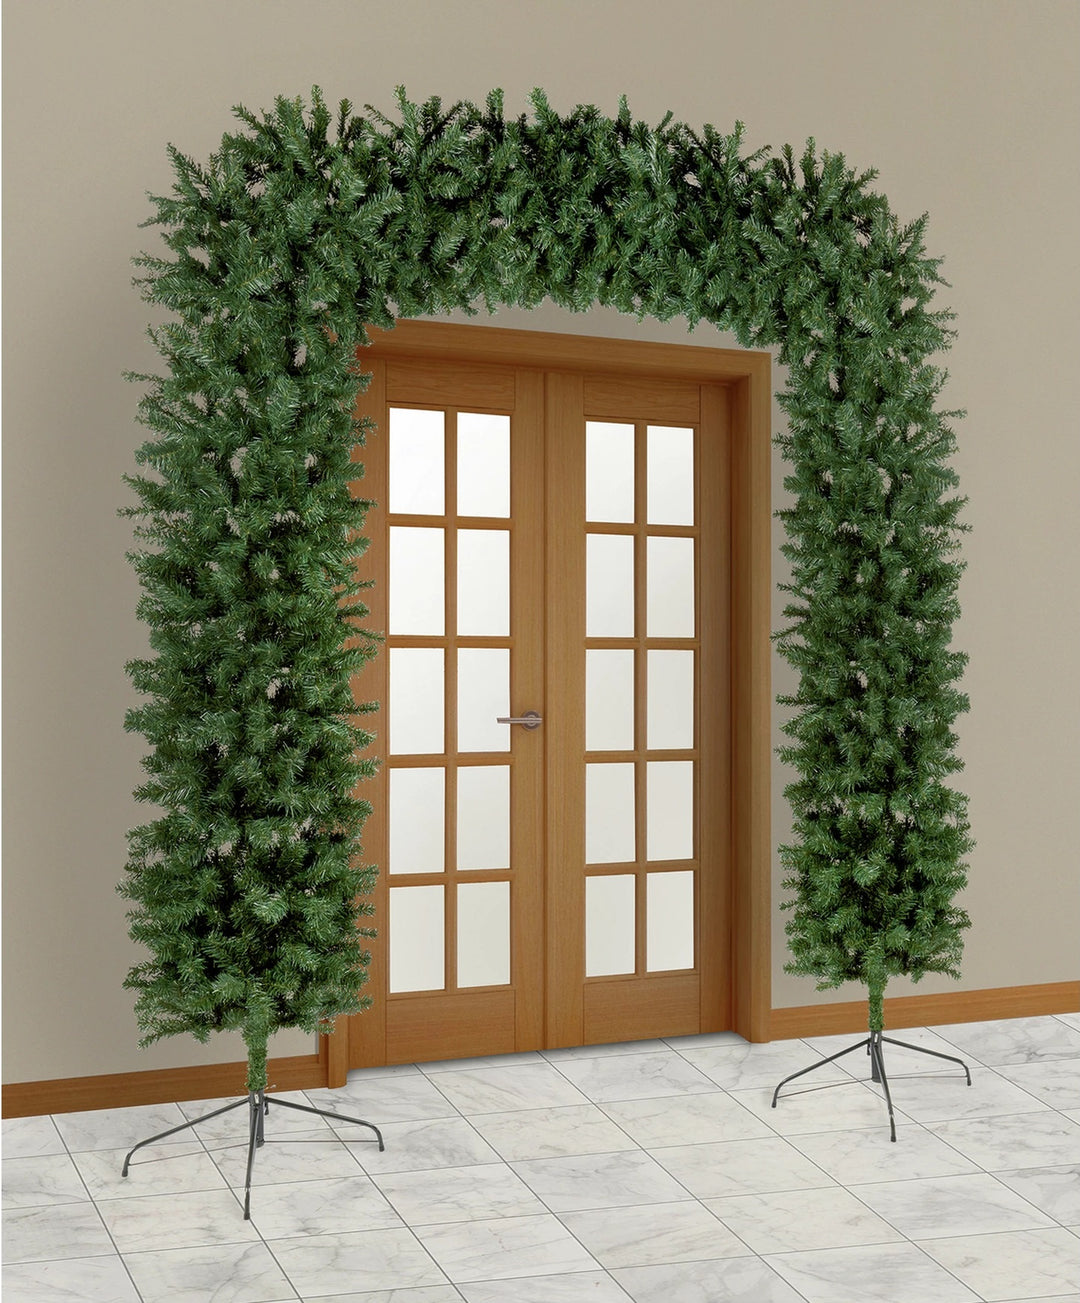 Premier Decorations 8ft Archway Christmas Tree - Green